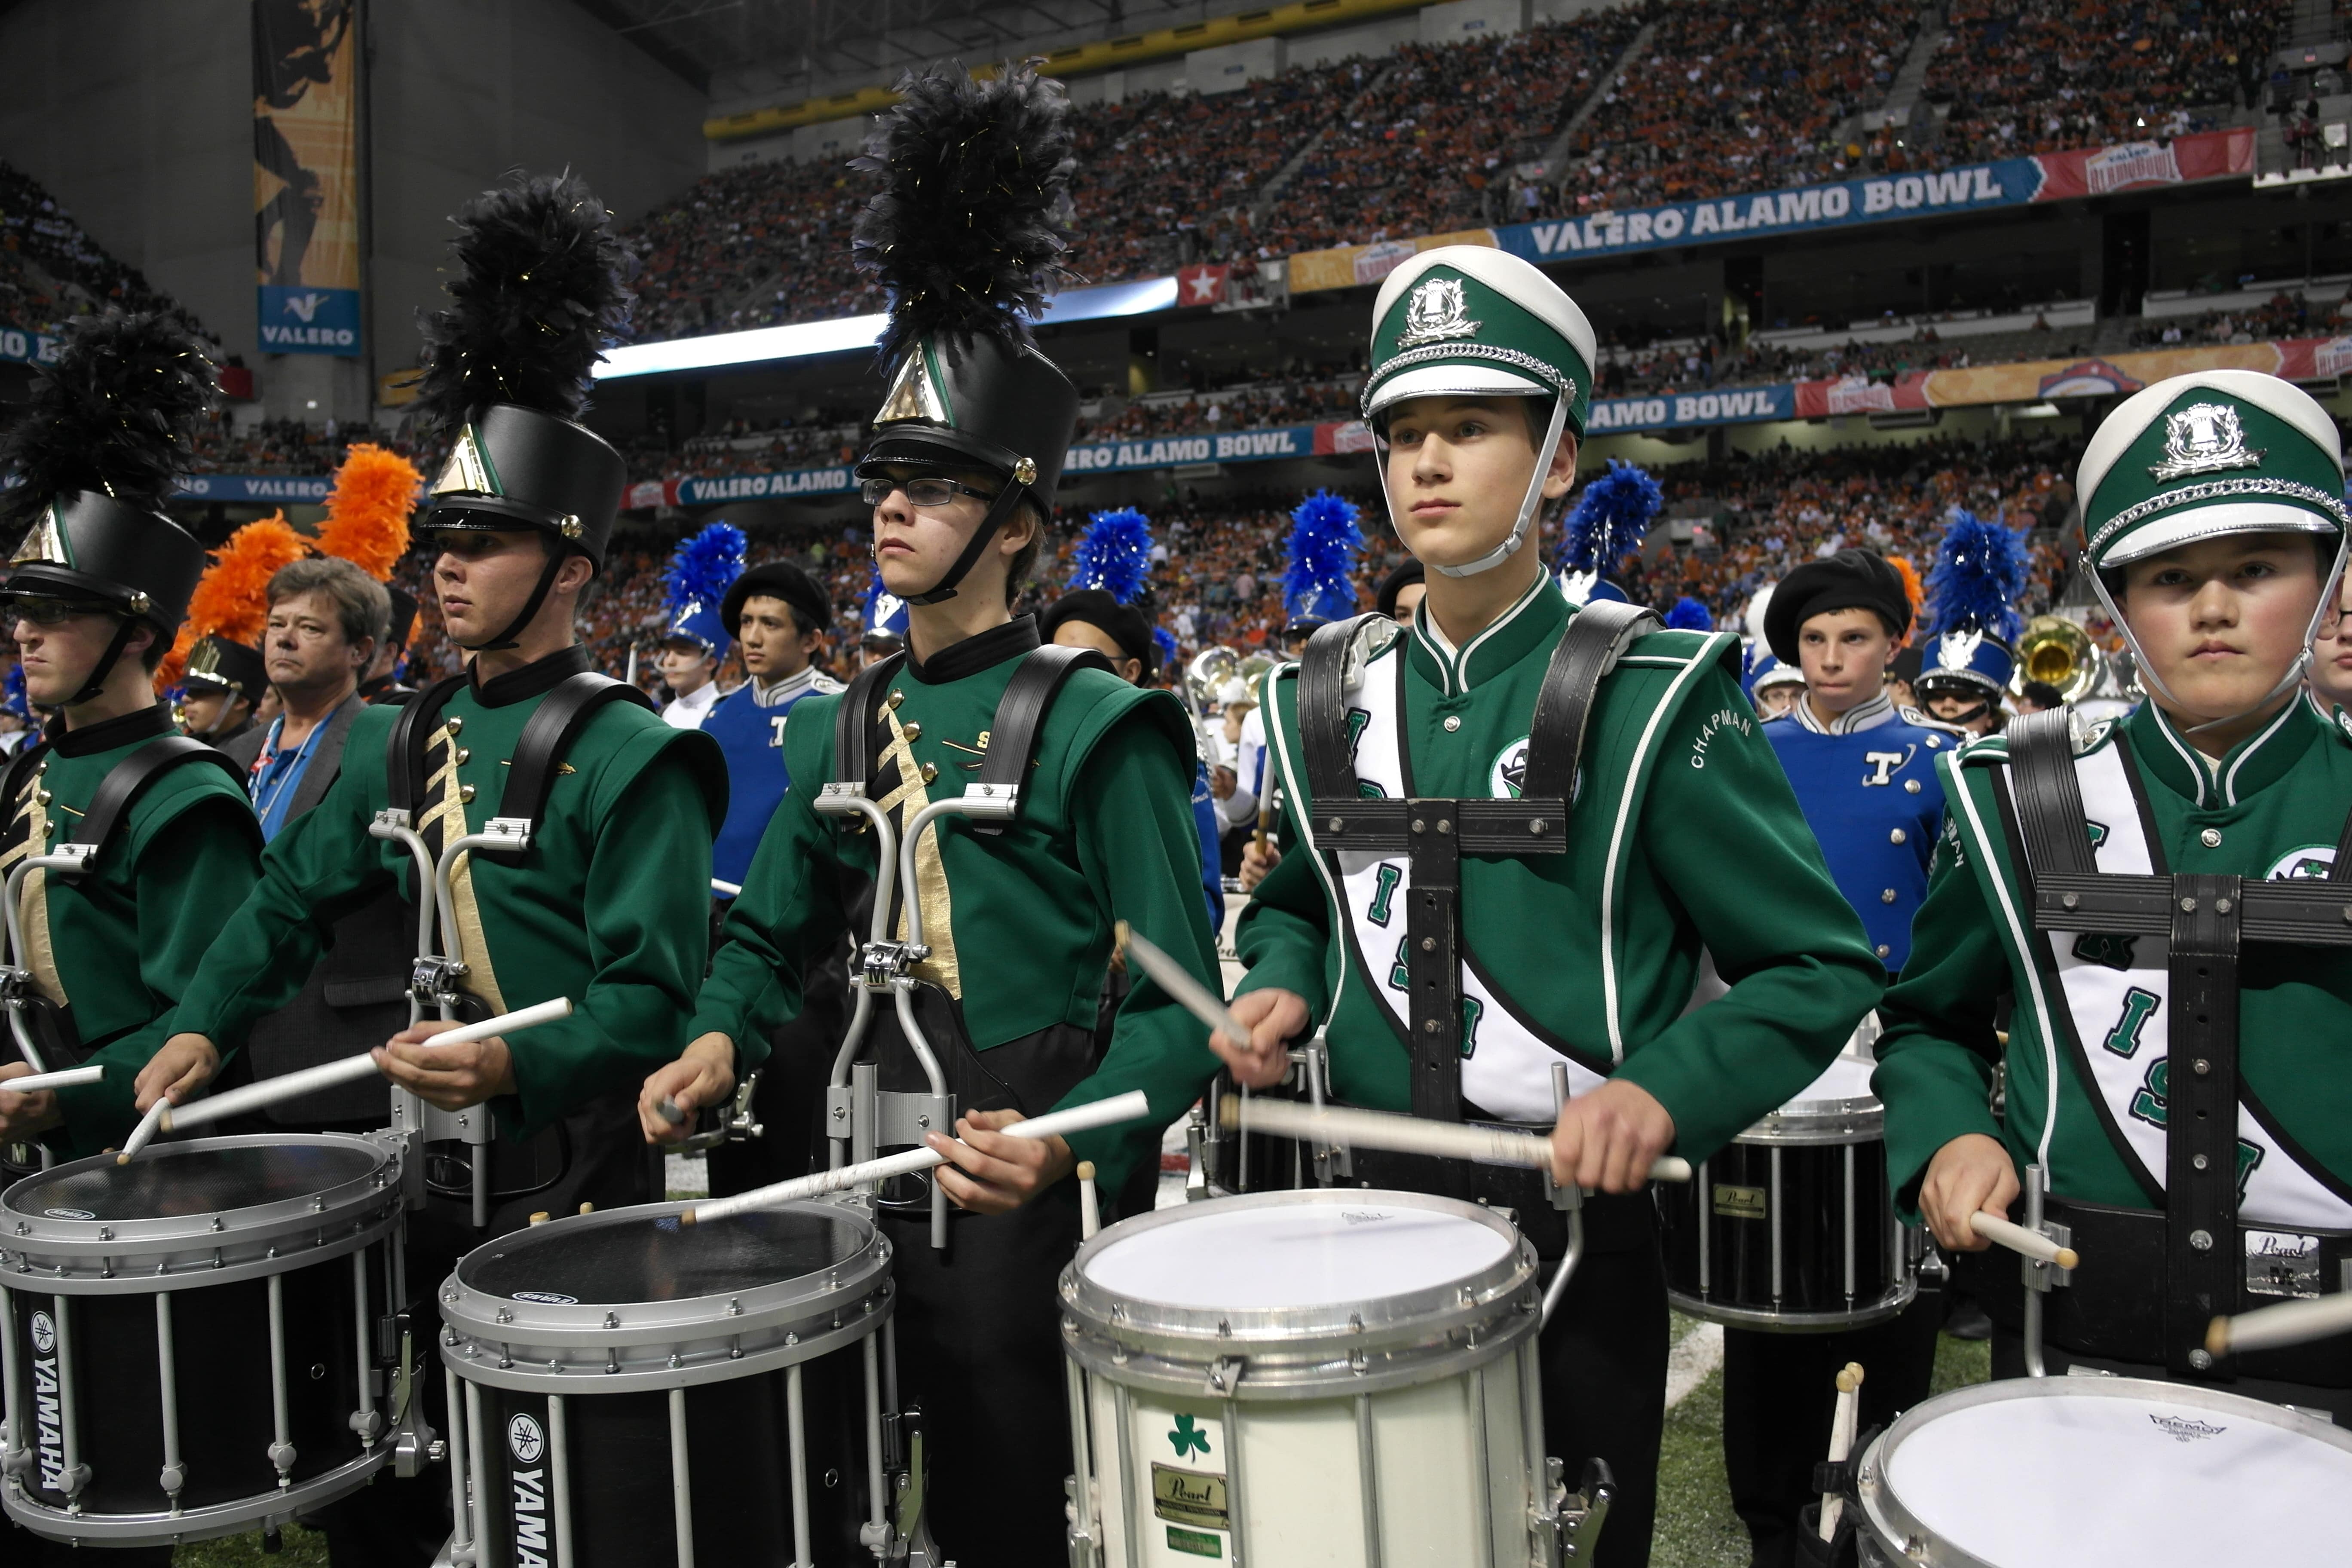 6 EASY Tips from 2 Directors to Make Your Marching Band